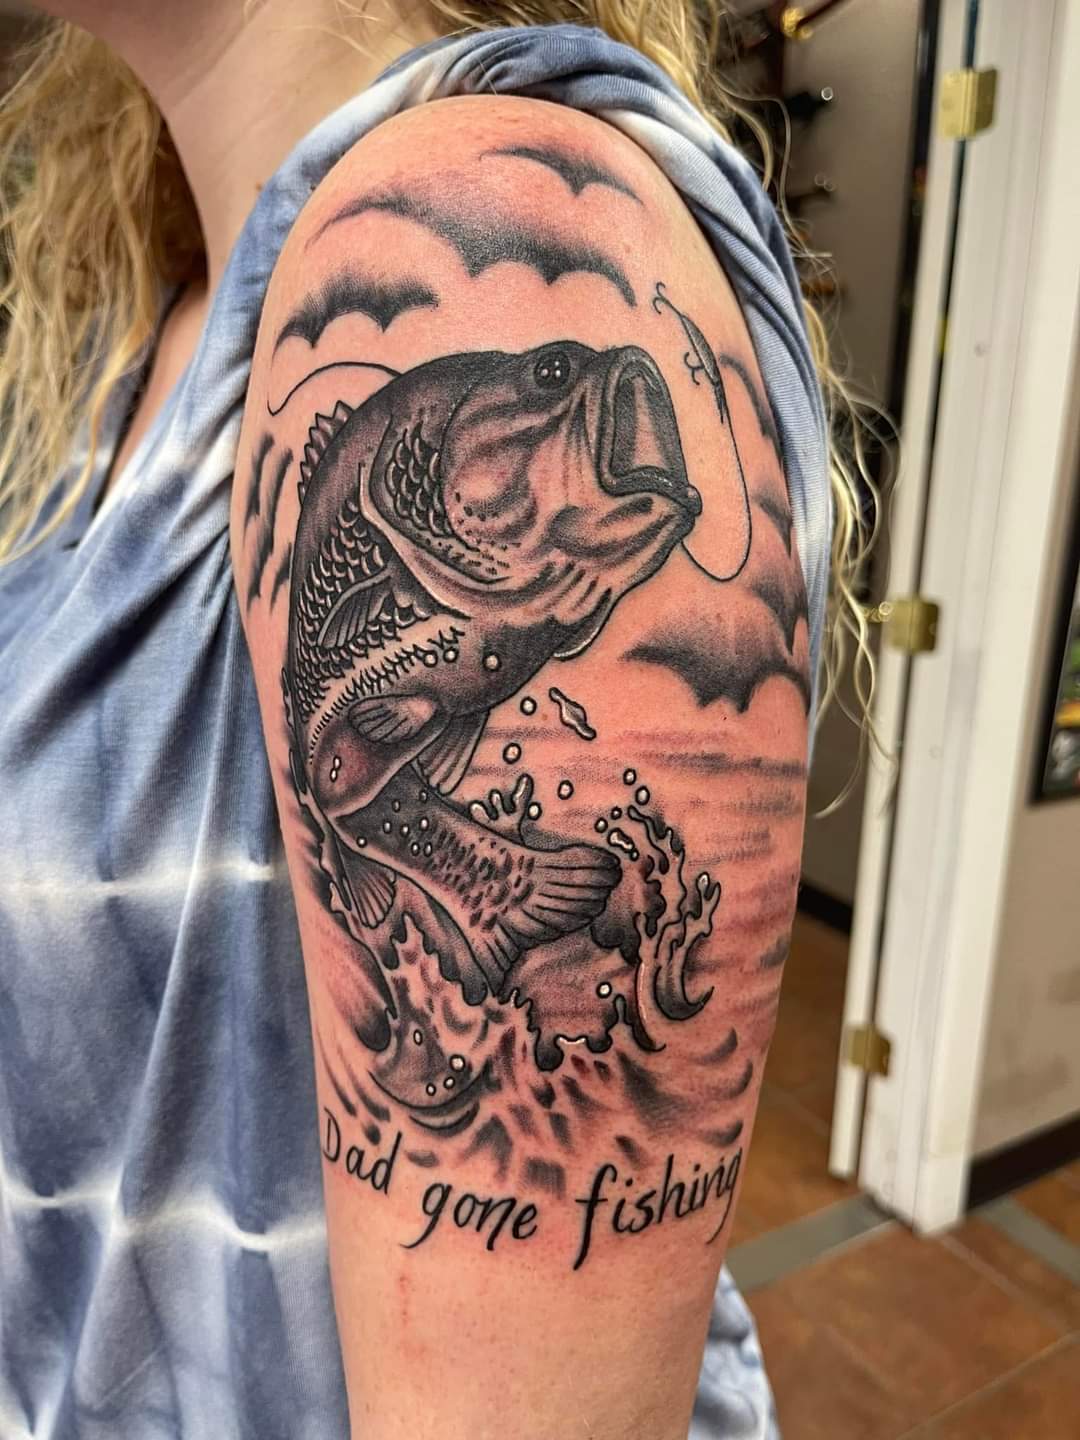 Body Graphics Tattoo Carleton Place  A memorial tattoo for a dad who  loved to fish memorialtattoo ottawatattoo carletonplace  carletonplacetattoo bodygraphicstattoo  Facebook